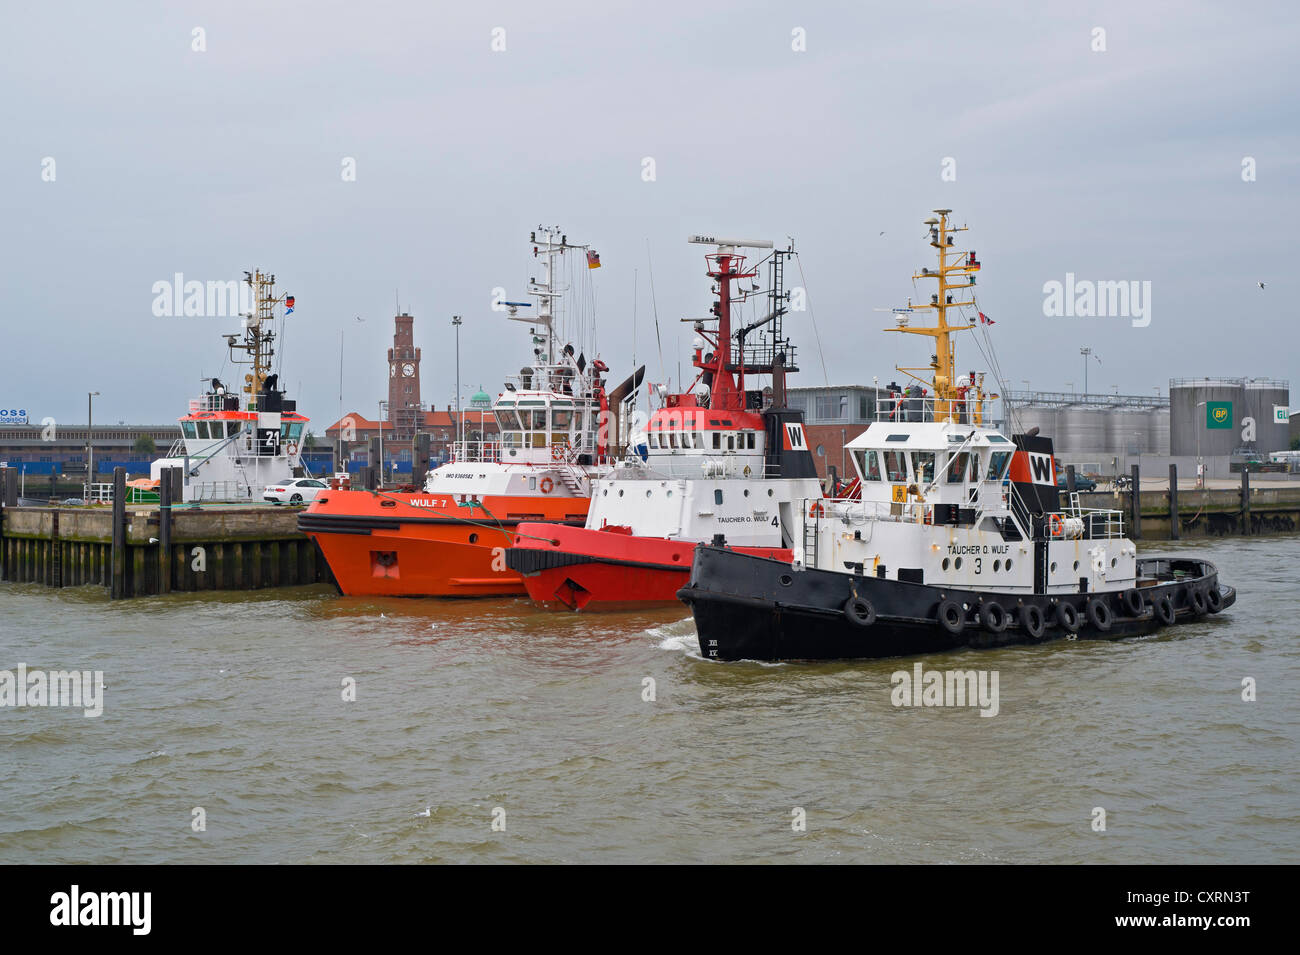 Taucher O. Wulf and various tug boats in the port of Cuxhaven, Lower Saxony, Germany, Europe, PublicGround Stock Photo